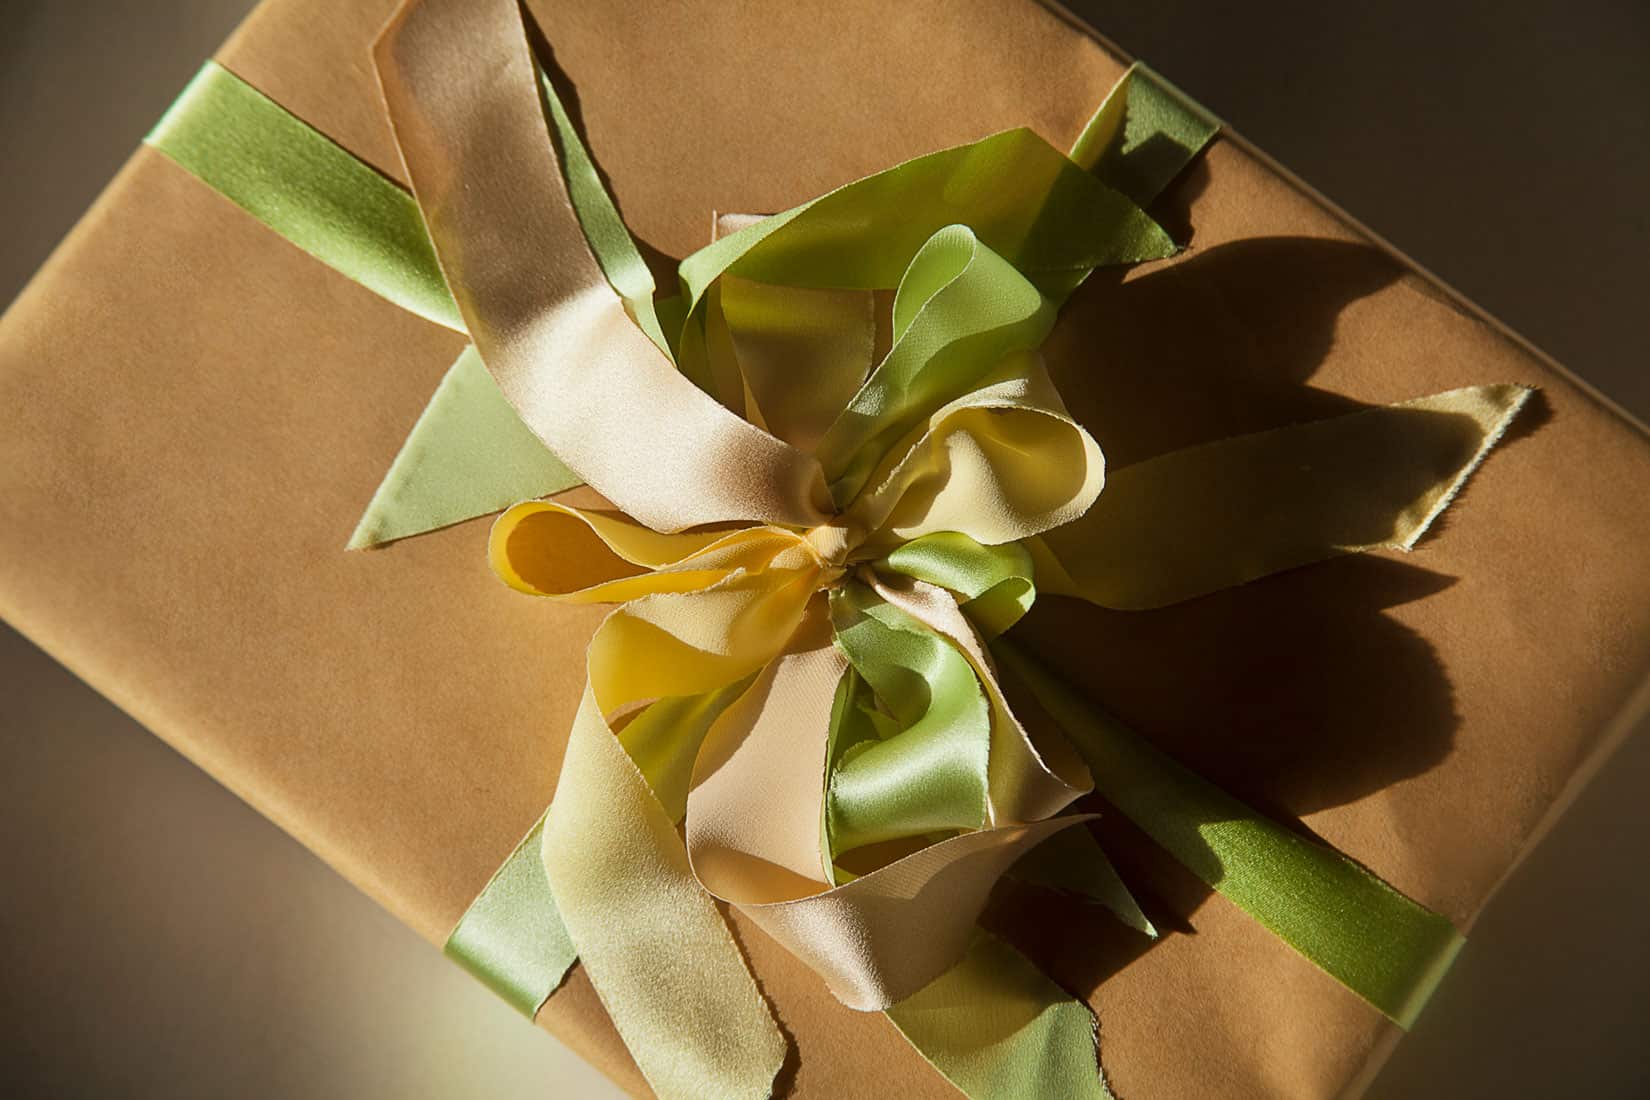 Vintage Gift Wrapping